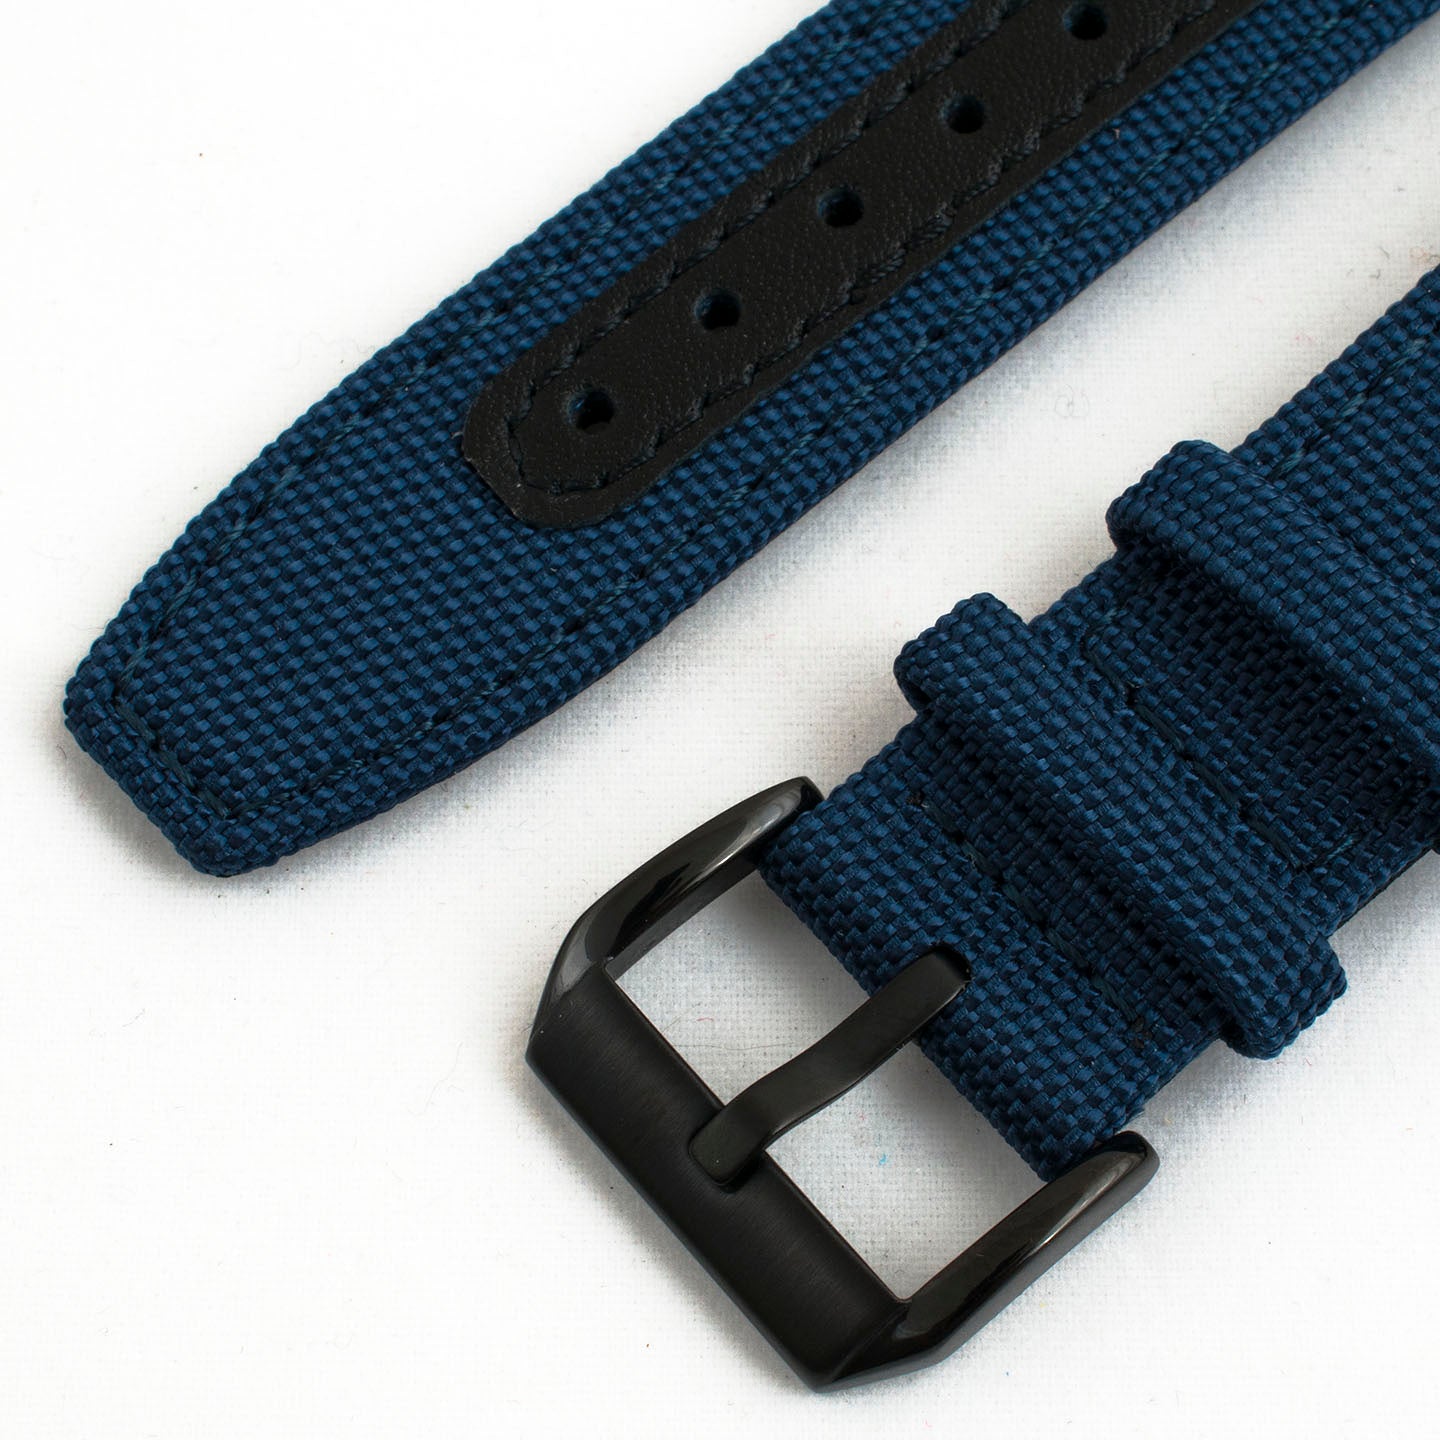 Premium Sailcloth quick release watch strap band replacement 19mm, 20mm, 21mm, 22mm blue with black buckle